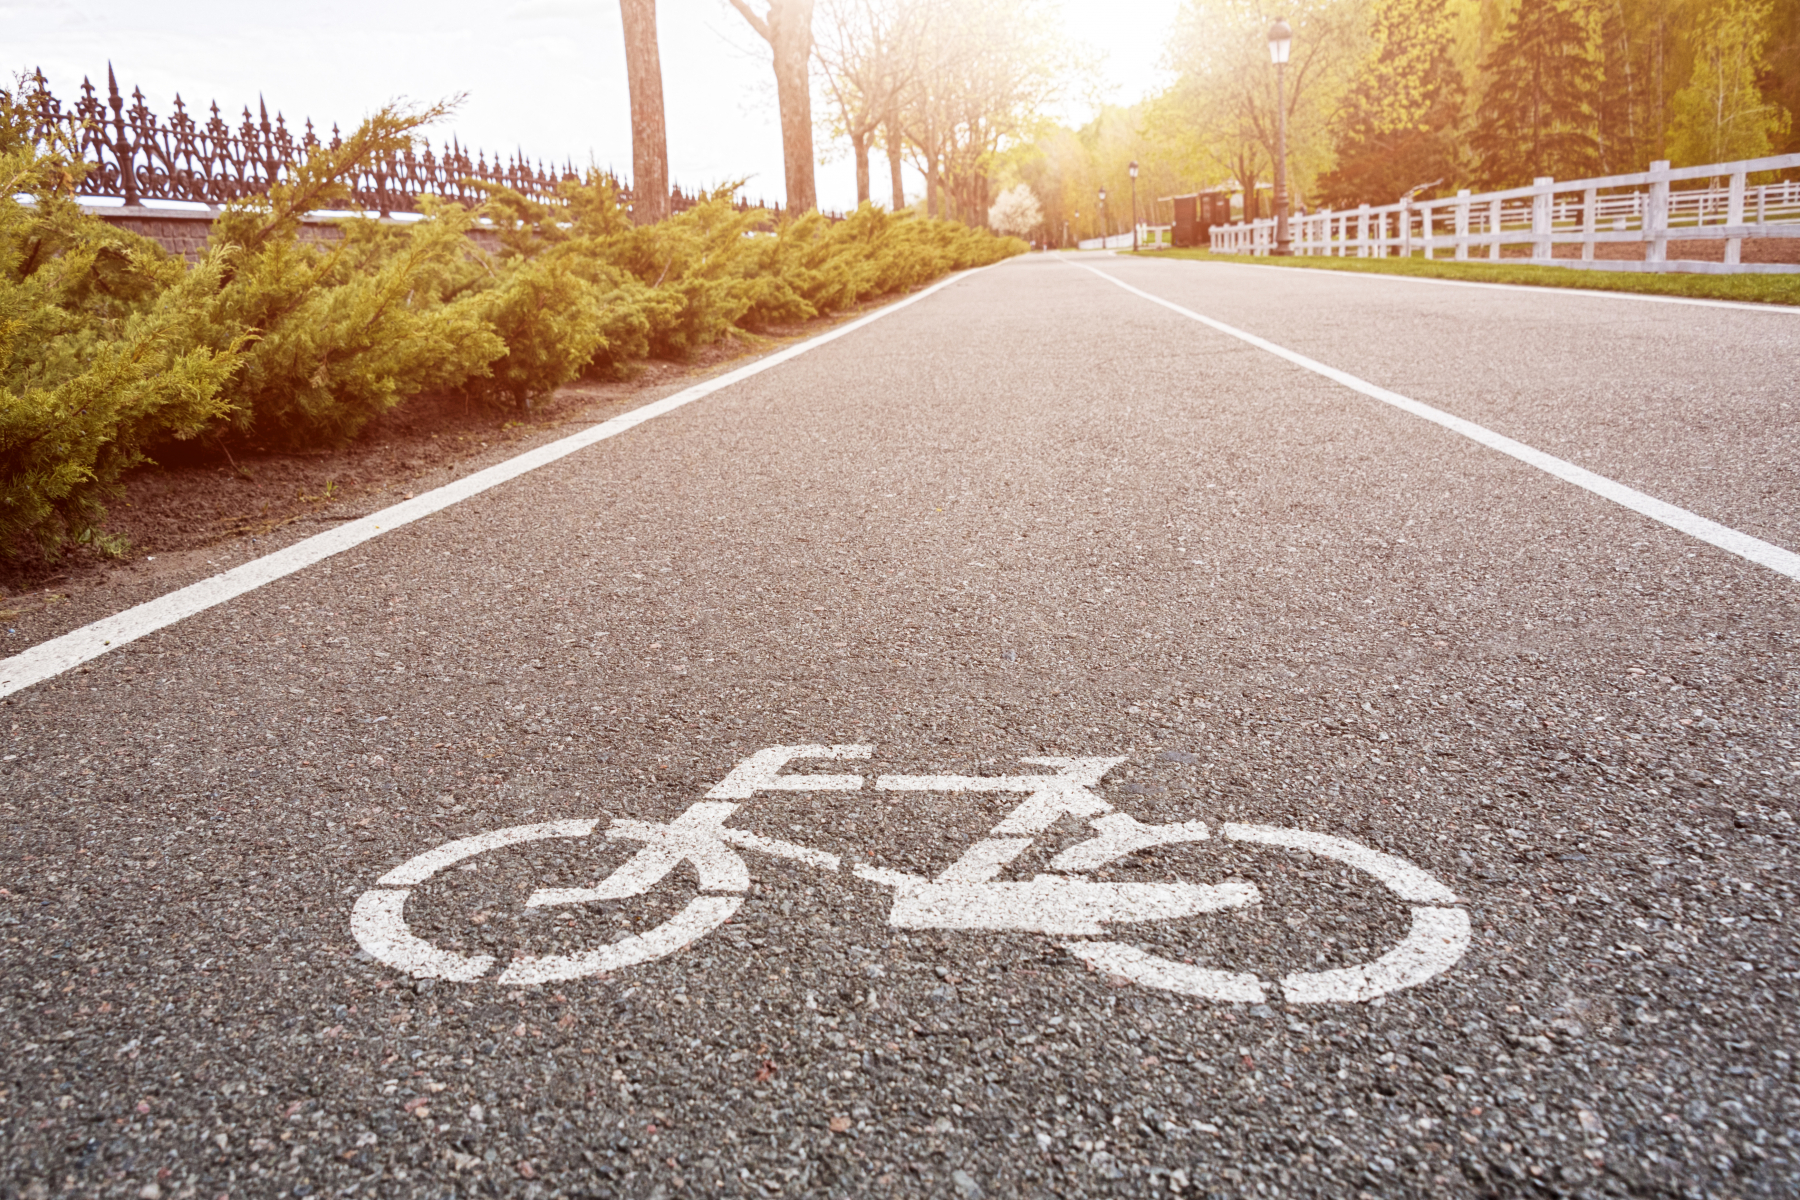 44014608-bicycle-sign-on-the-road-bike-lane-in-the-park_commercial license.jpg